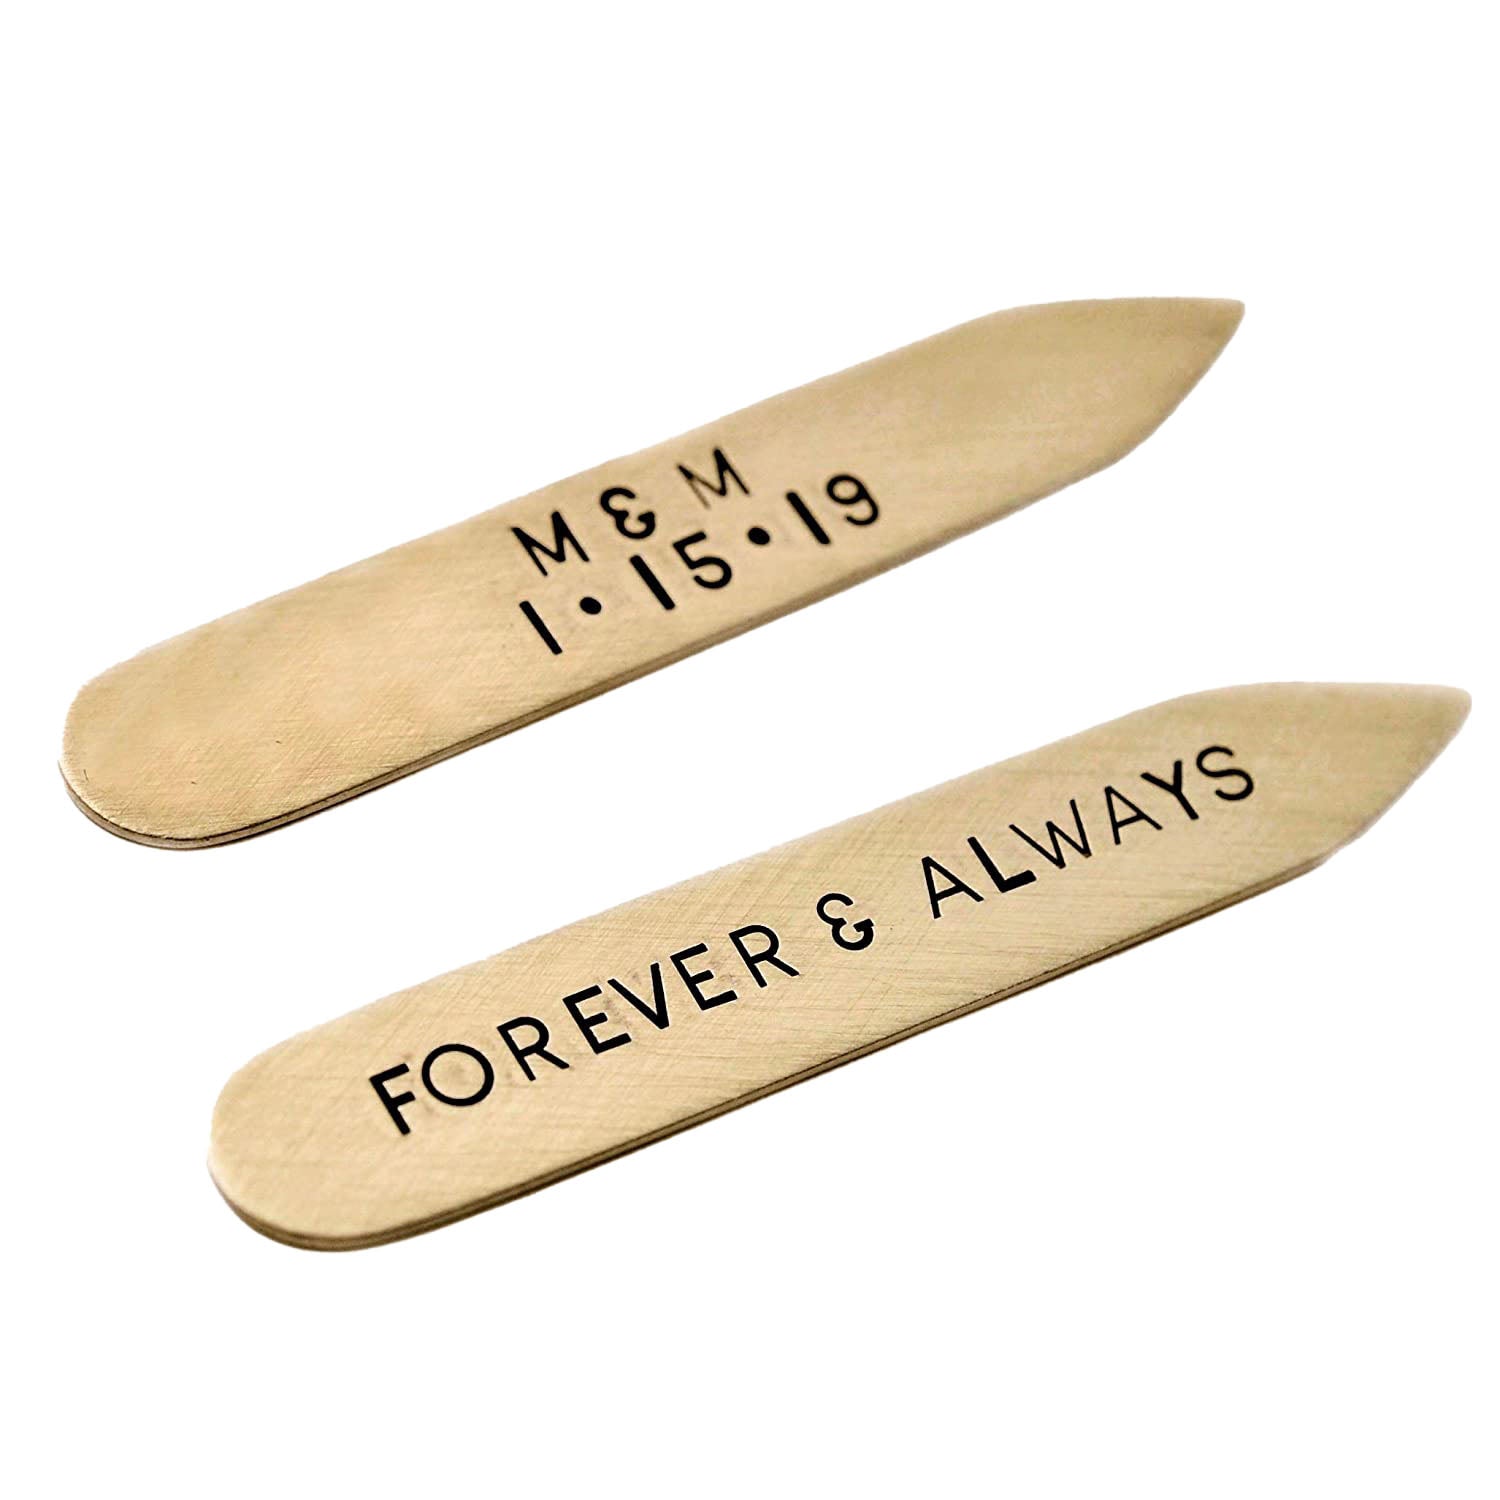 Bronze Collar Stays - 8th Anniversary Gift - Love It Personalized